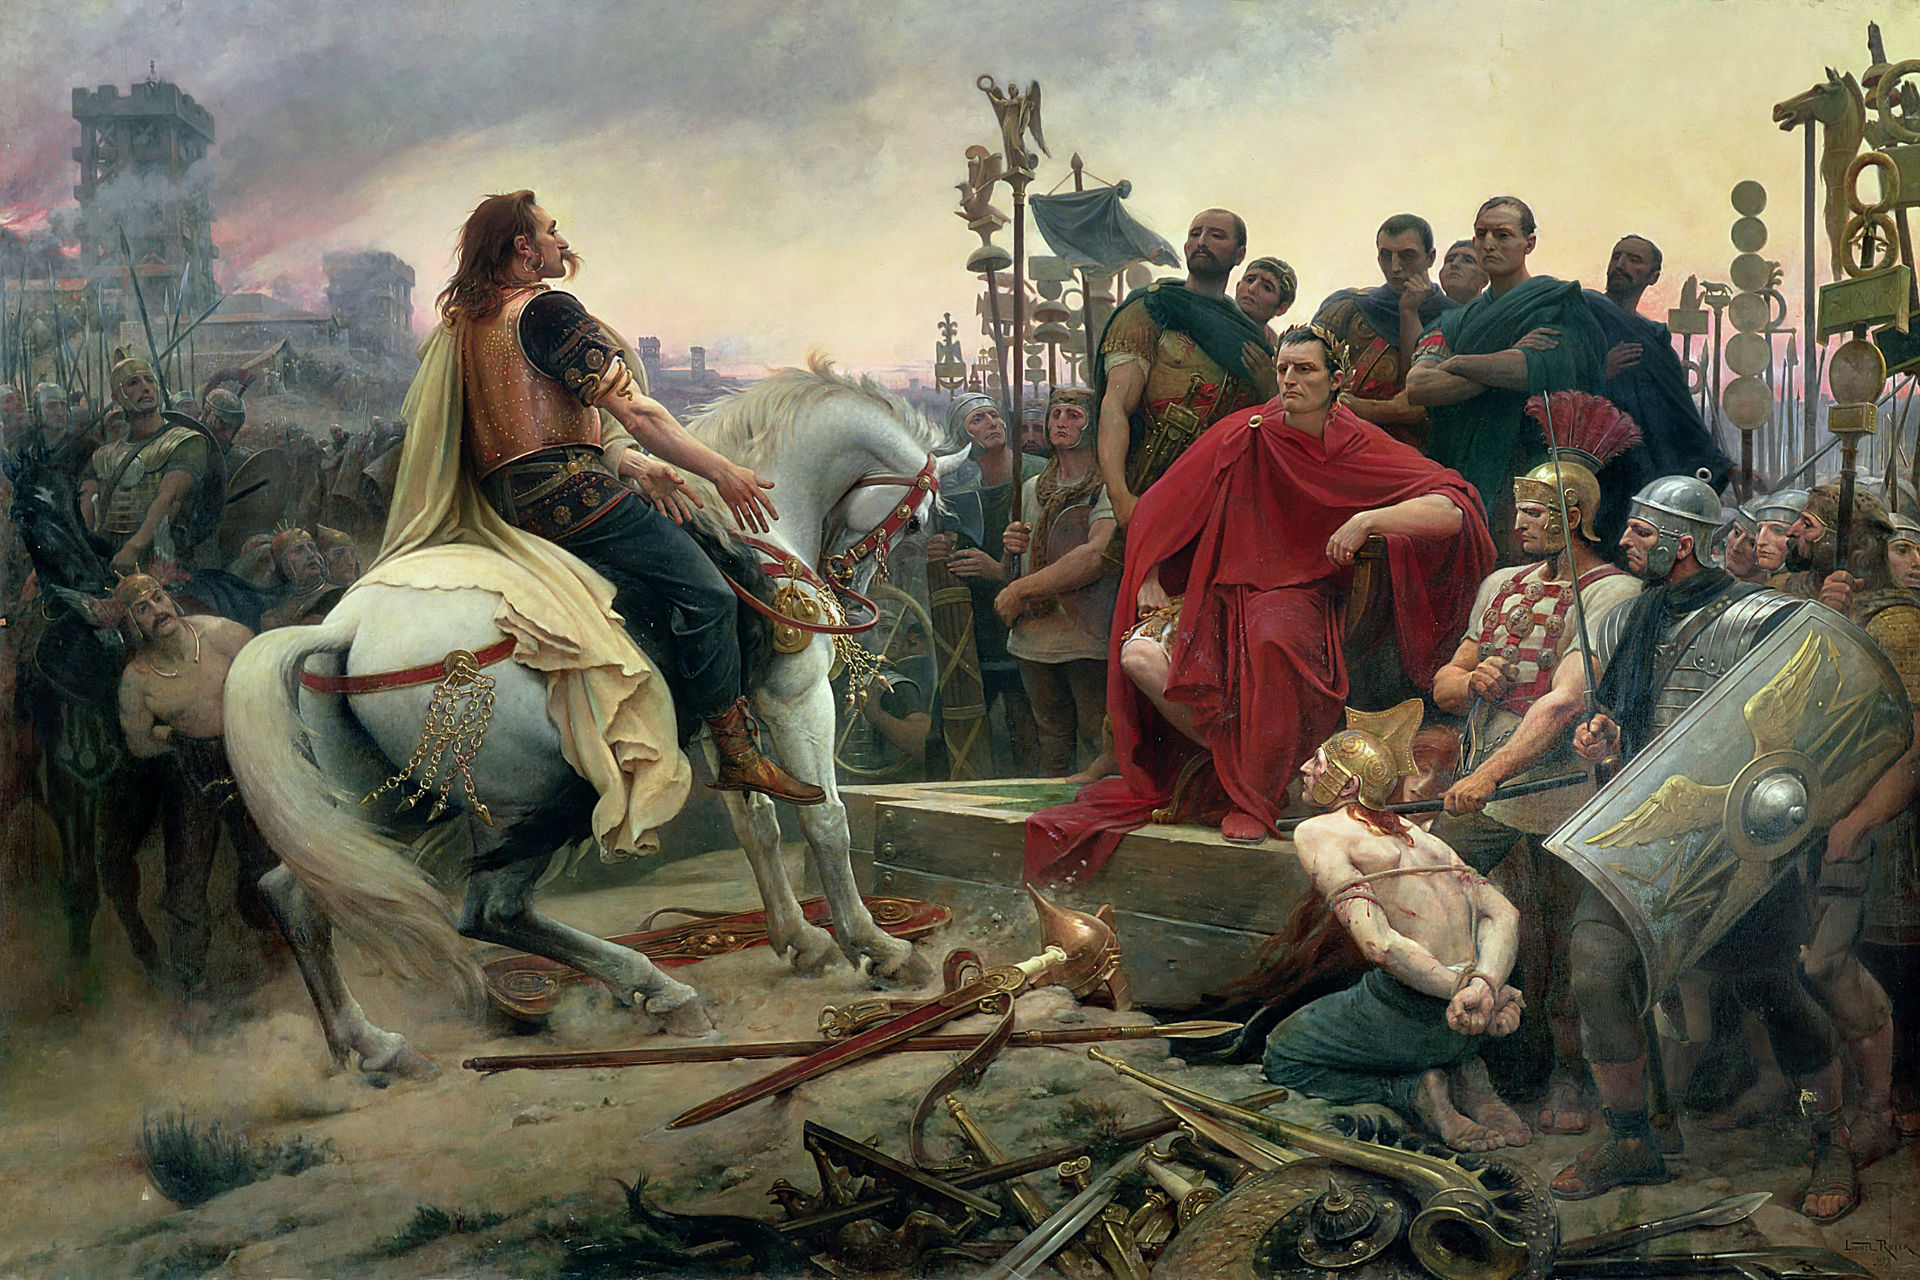 The painting depicts the surrender of the Gallic chieftain after the Battle of Alesia (52 BC). Note that one of the warriors (bottom left) has a torque around his neck. In fact, the torque was reserved only for gods and important members of a royal family. The depiction of Gauls with long hair and mustaches is also called into question today. The horse is a Percheron, although at this time this breed was not in Gaul. In addition, the Gauls rode bareback, but here the horse is saddled and harnessed. The rectangular shield also does not accord with the time when they were mostly oval.